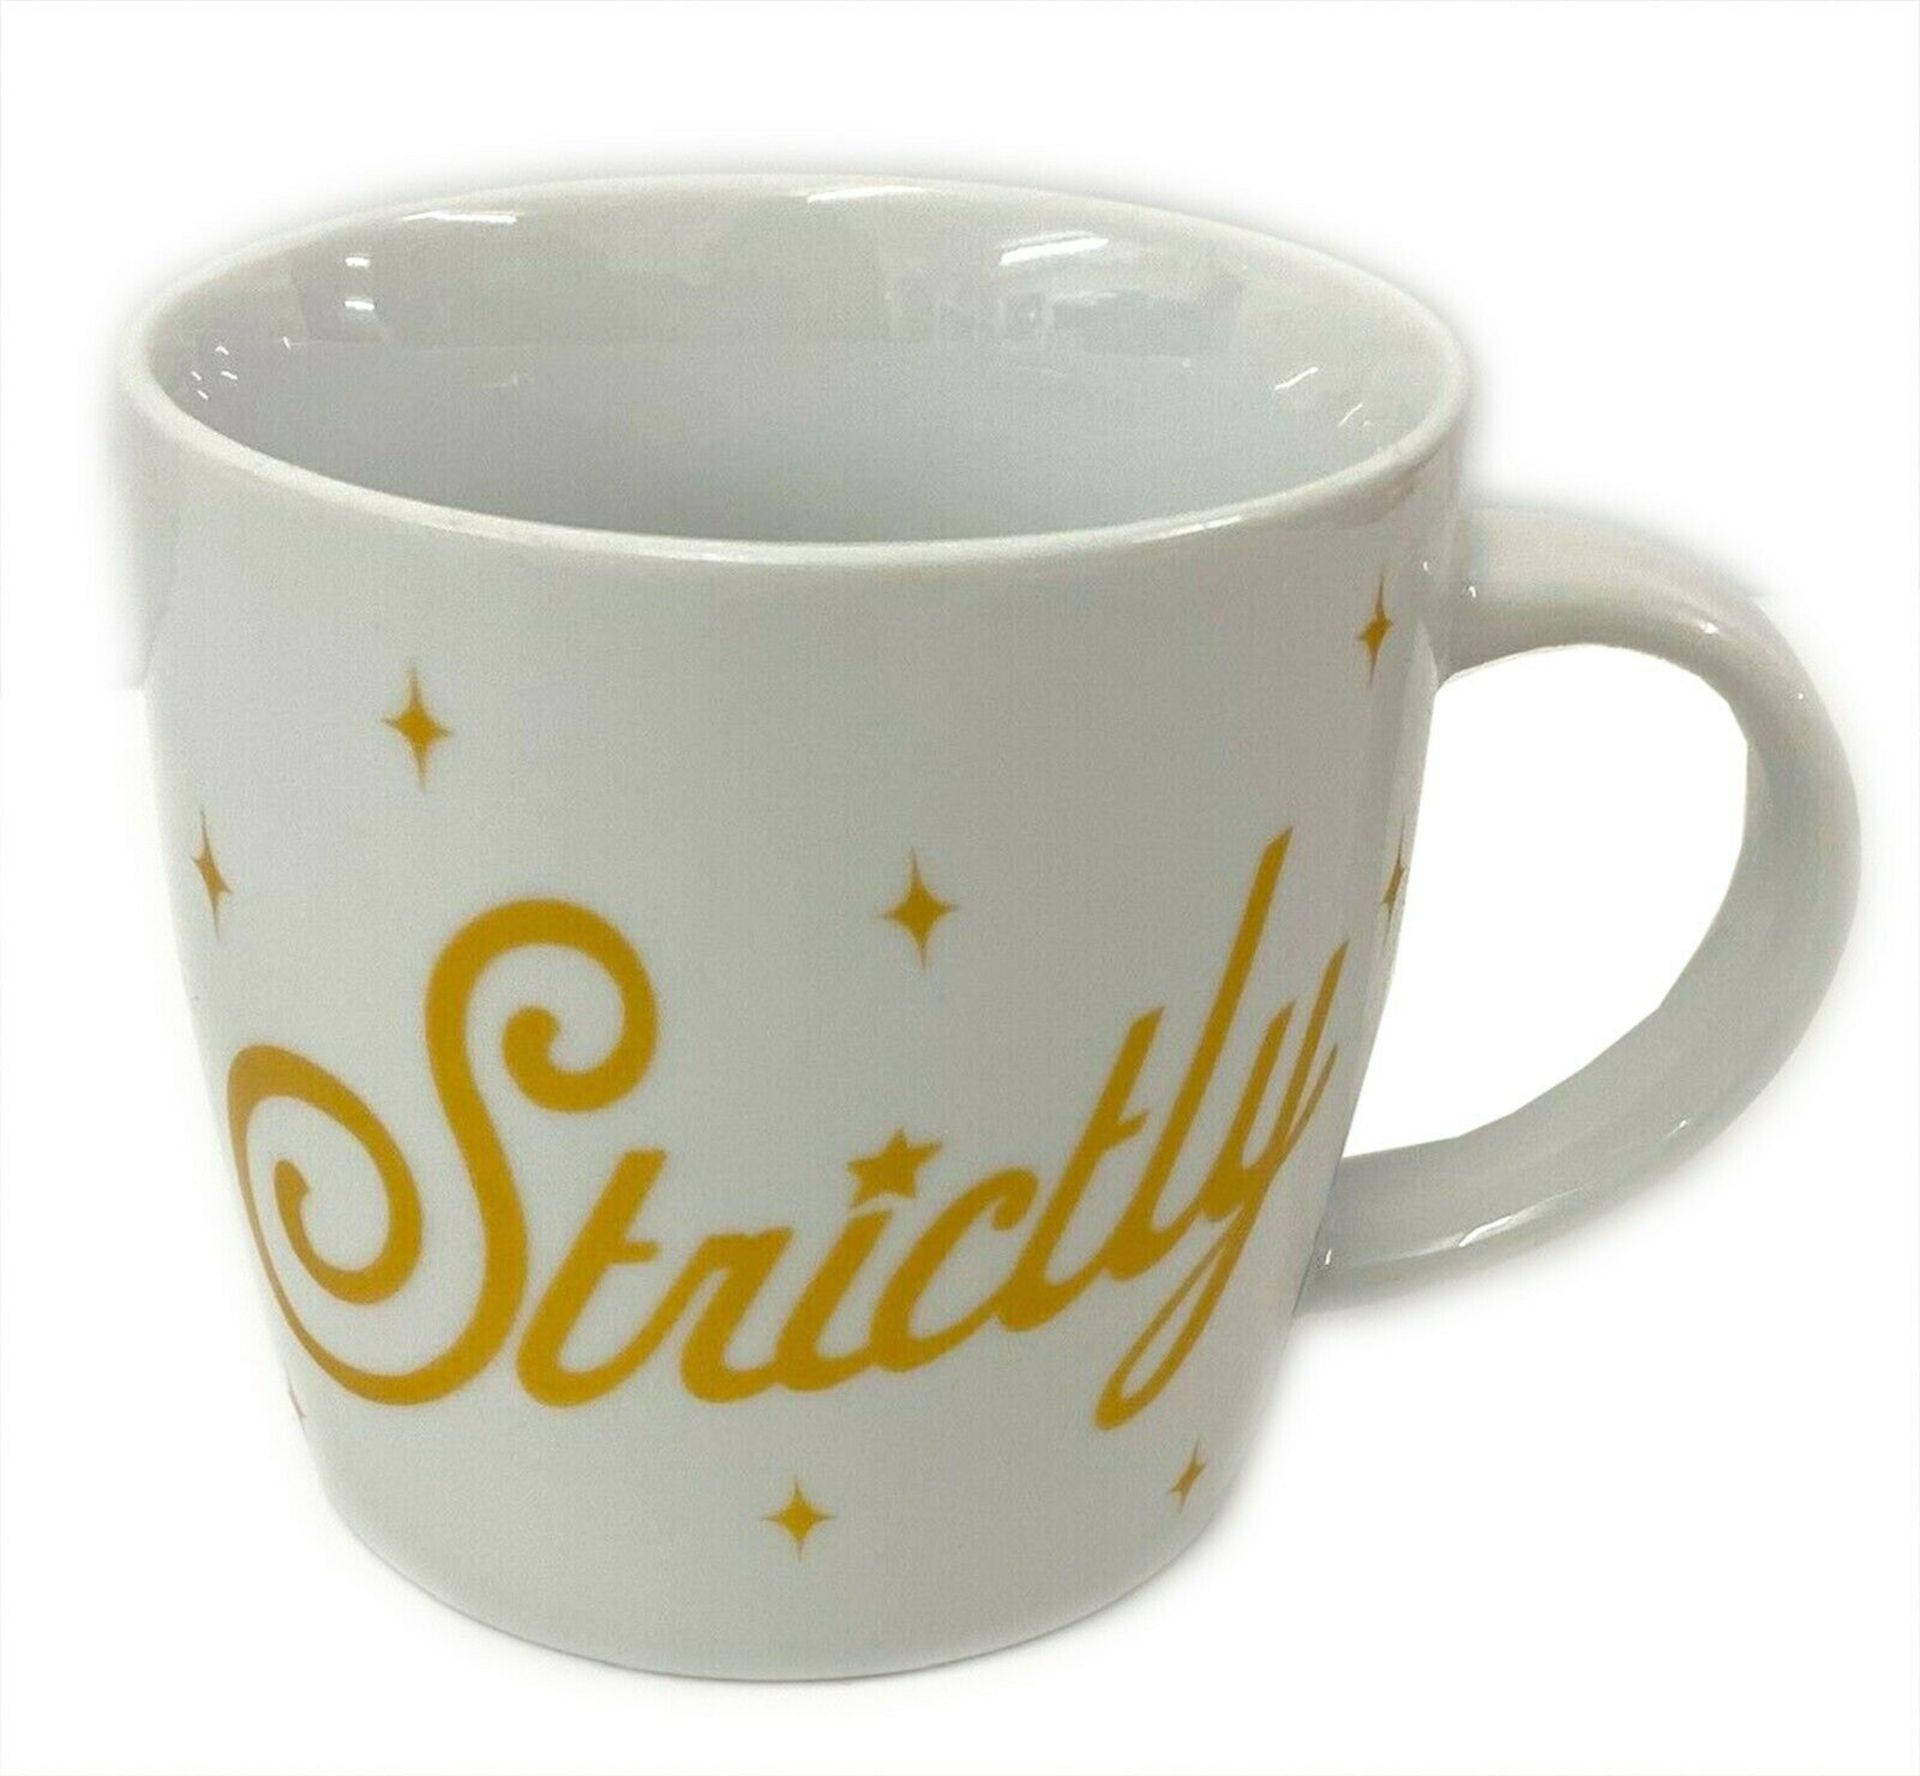 X2 BRAND NEW STRICTLY COME DANCING MUGS